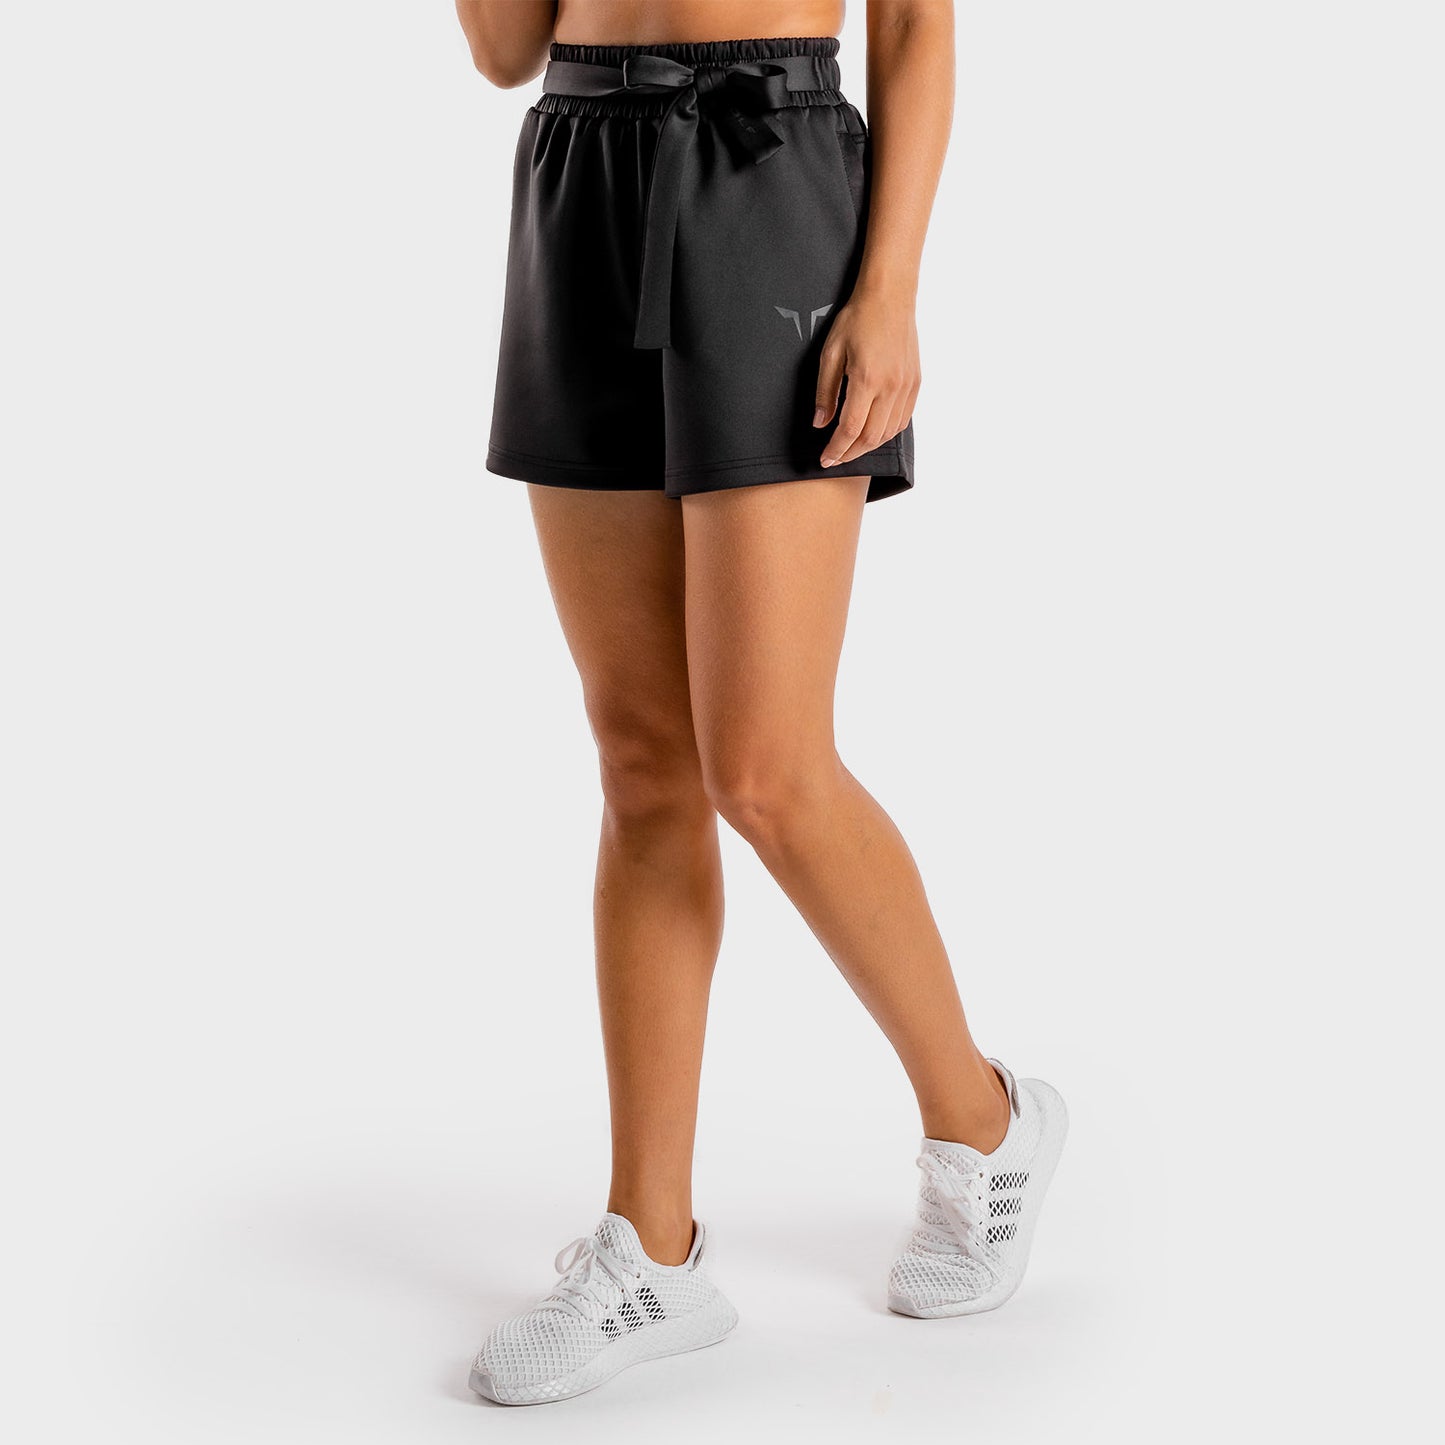 squatwolf-workout-clothes-do-knot-shorts-black-gym-shorts-for-women